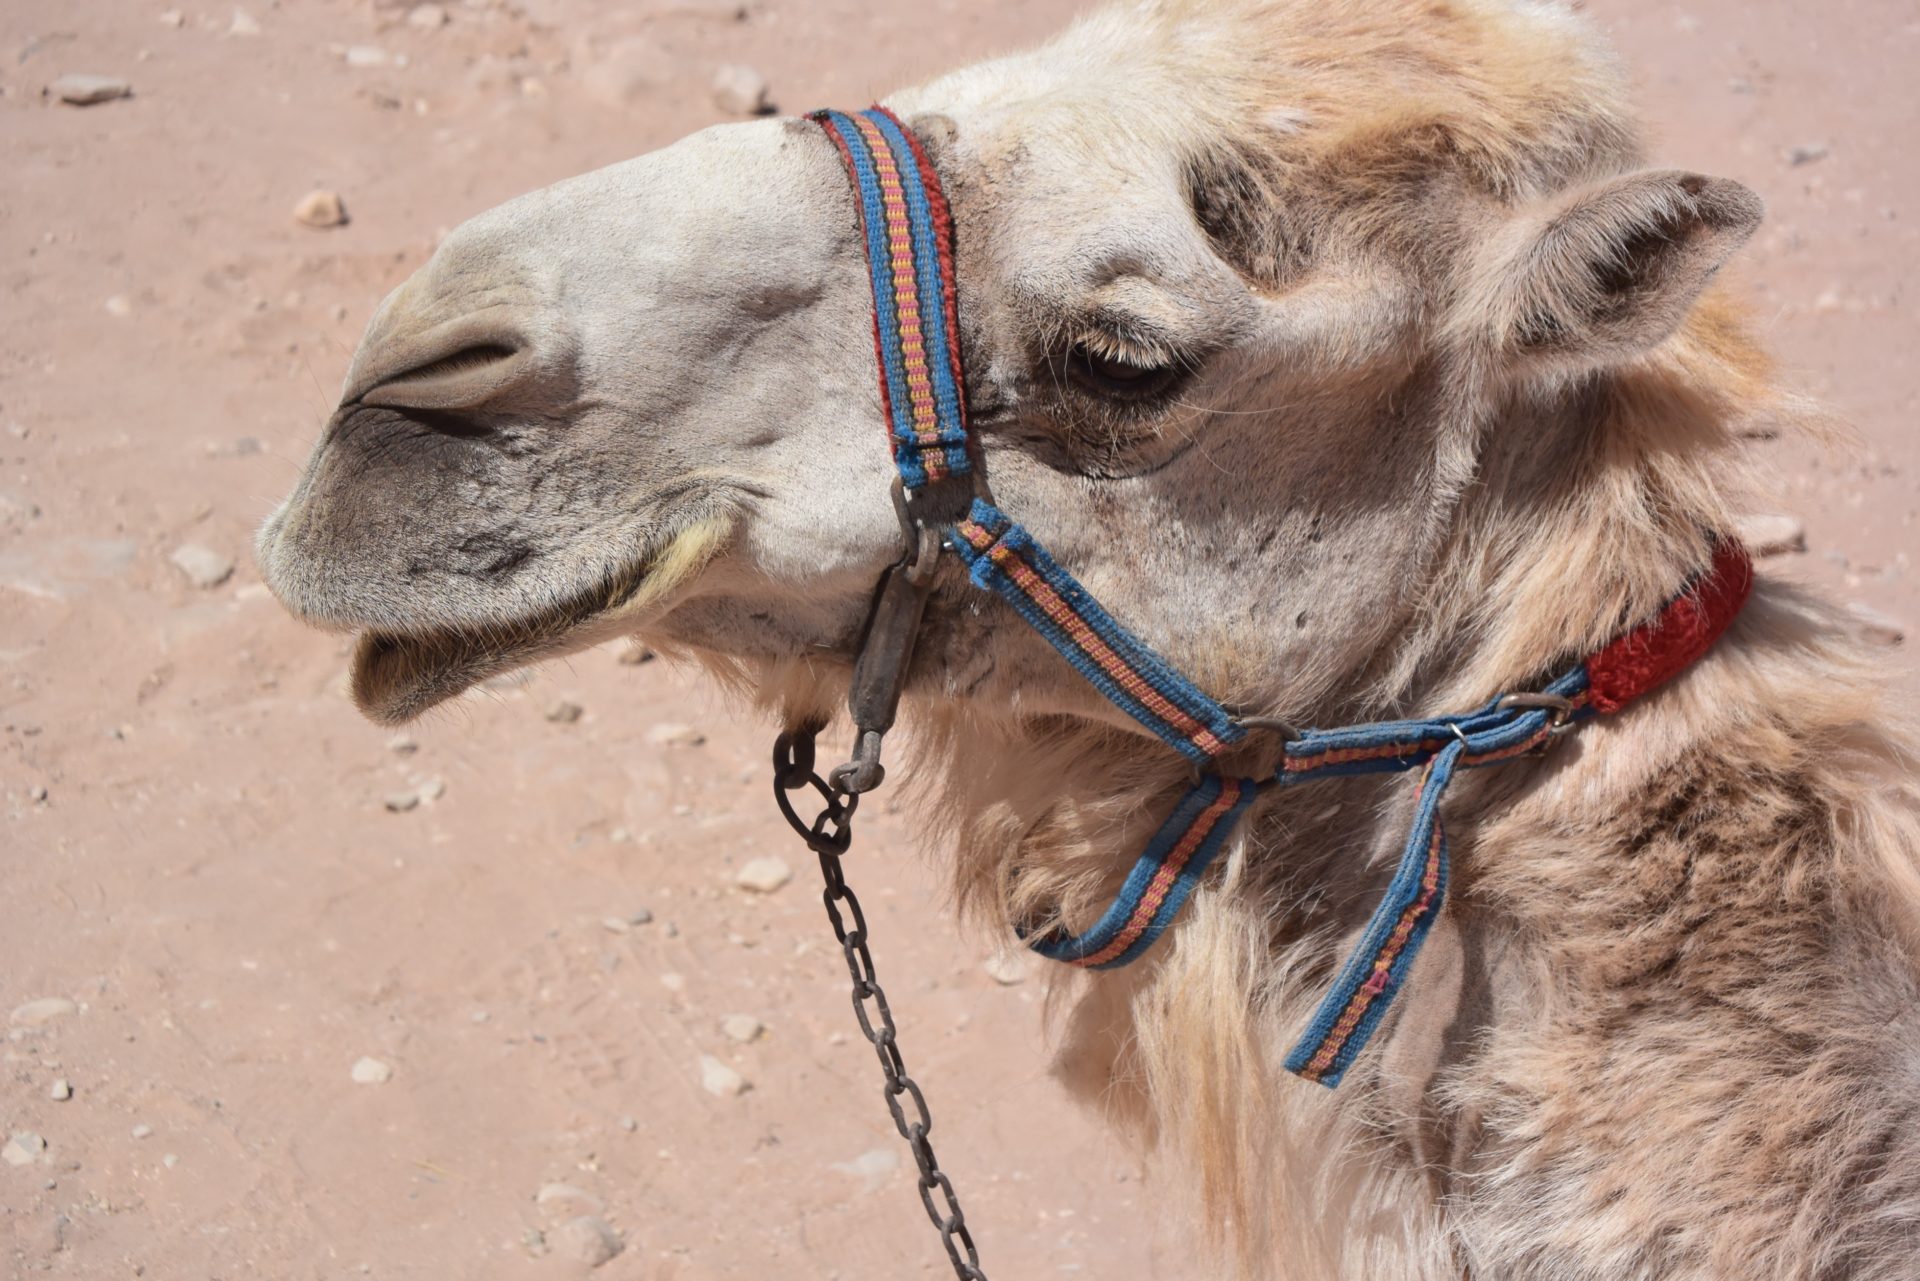 a camel with a harness on its head